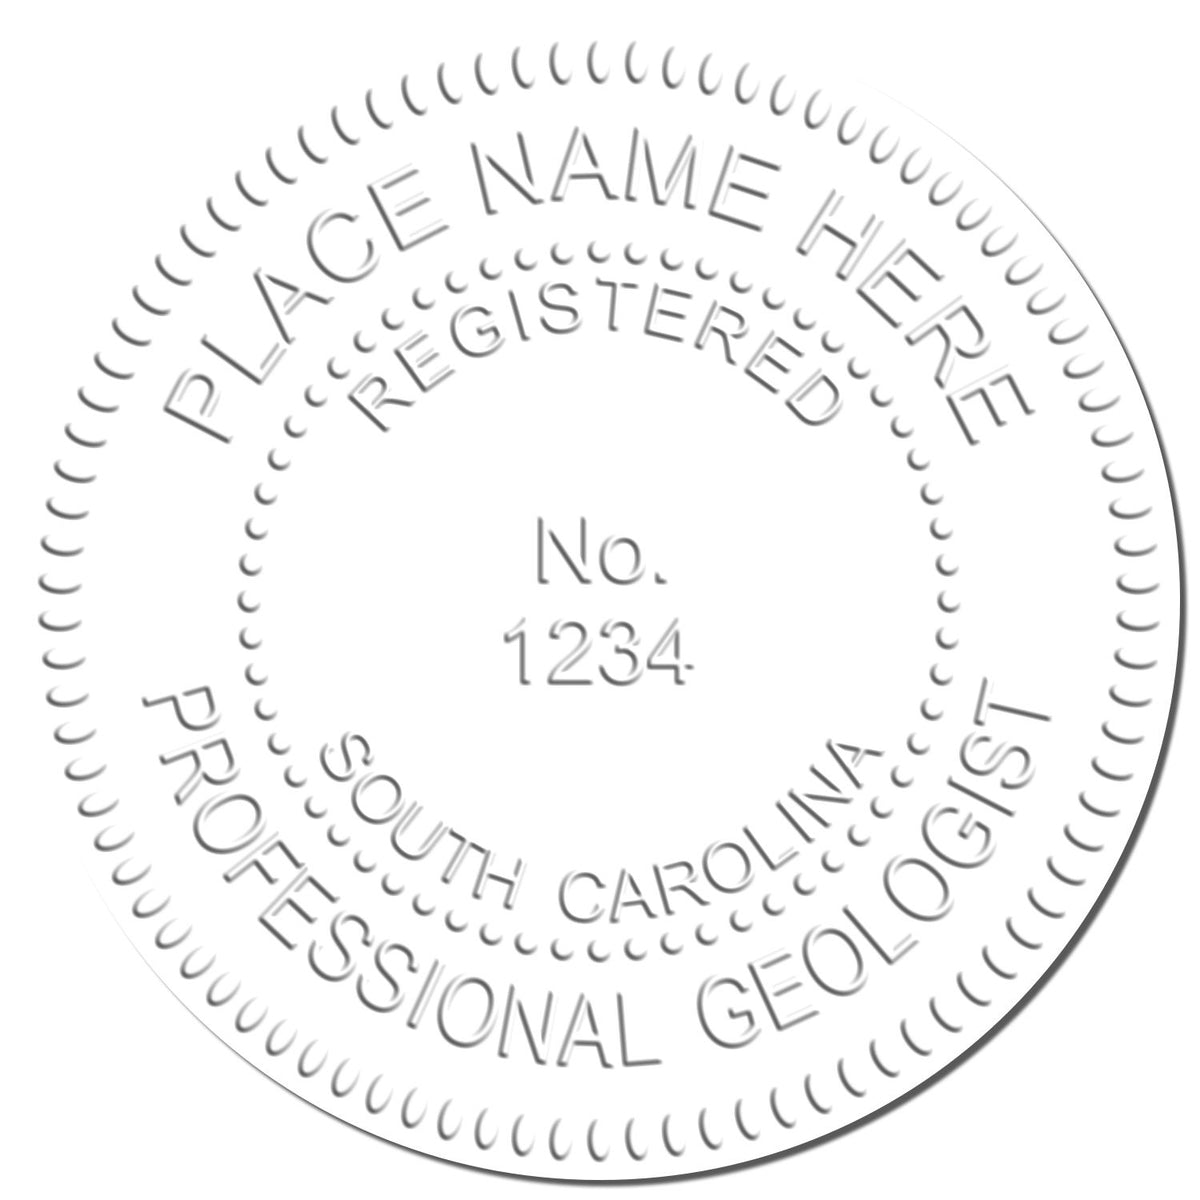 A photograph of the Hybrid South Carolina Geologist Seal stamp impression reveals a vivid, professional image of the on paper.